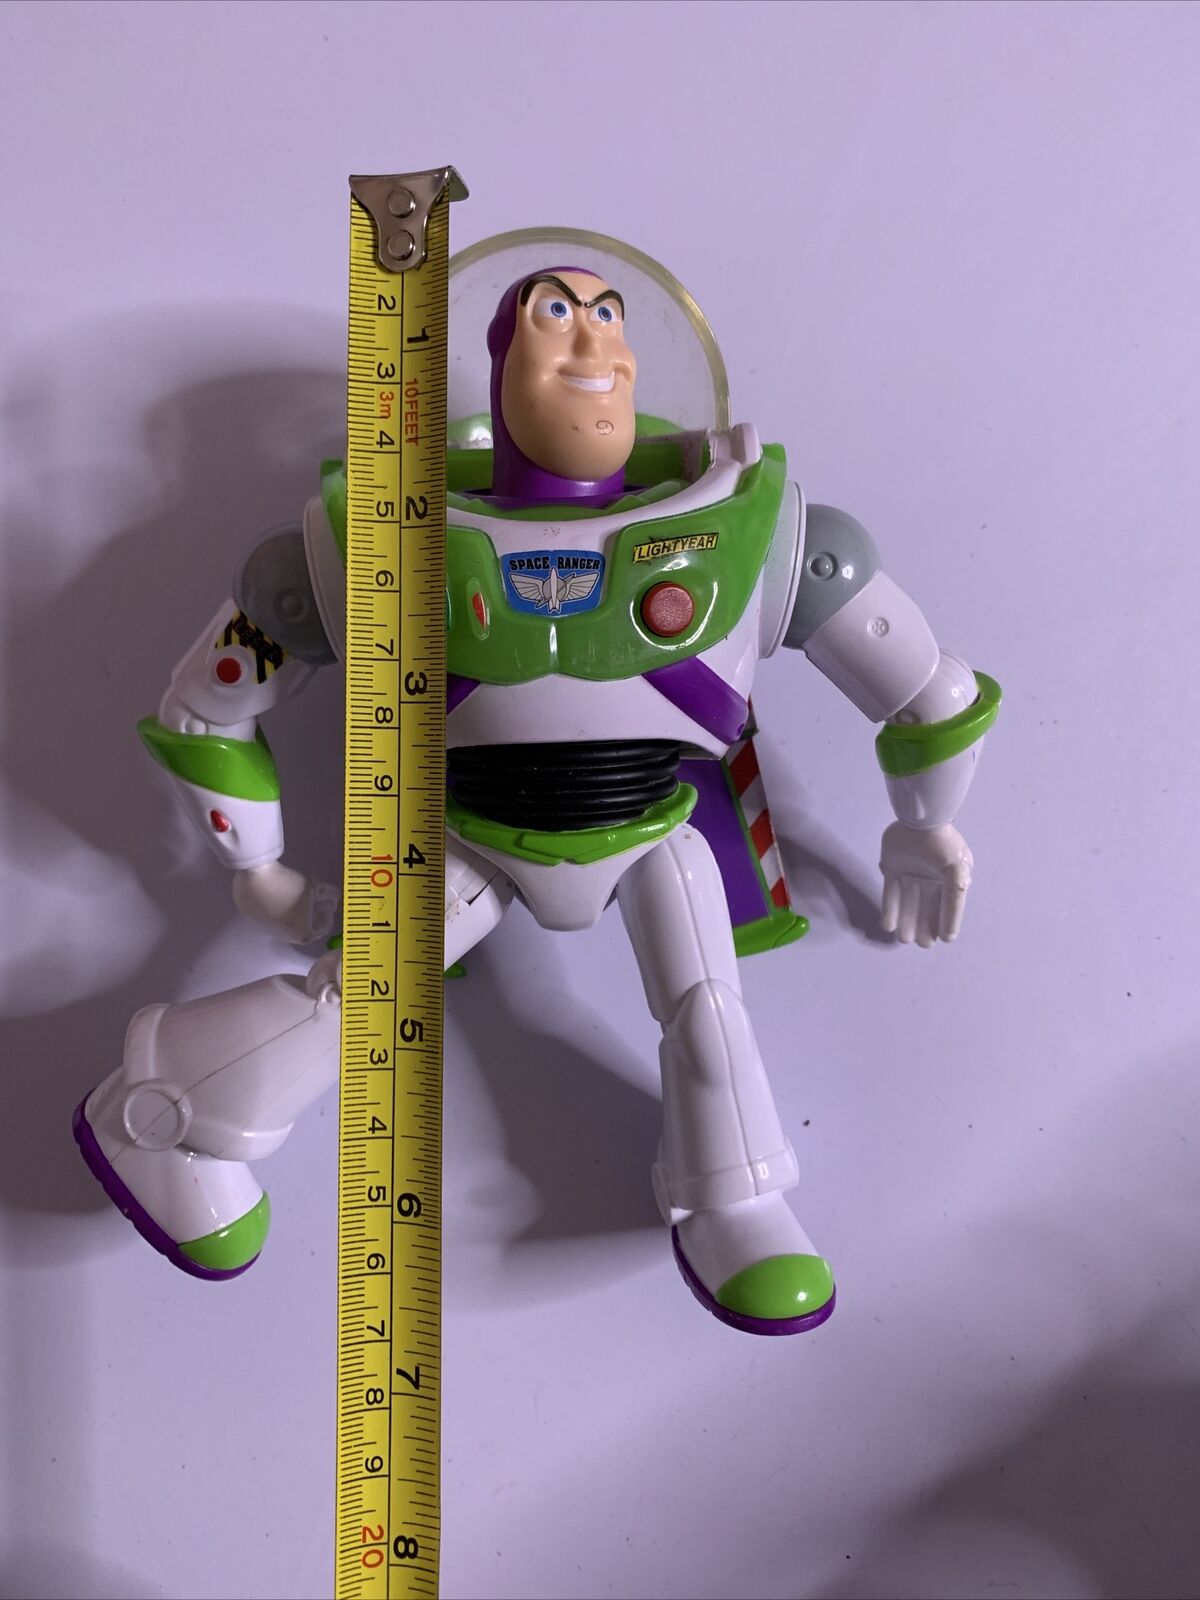 4x Toy Story Action Figure Woody Buzz Lightyear, Space Woody